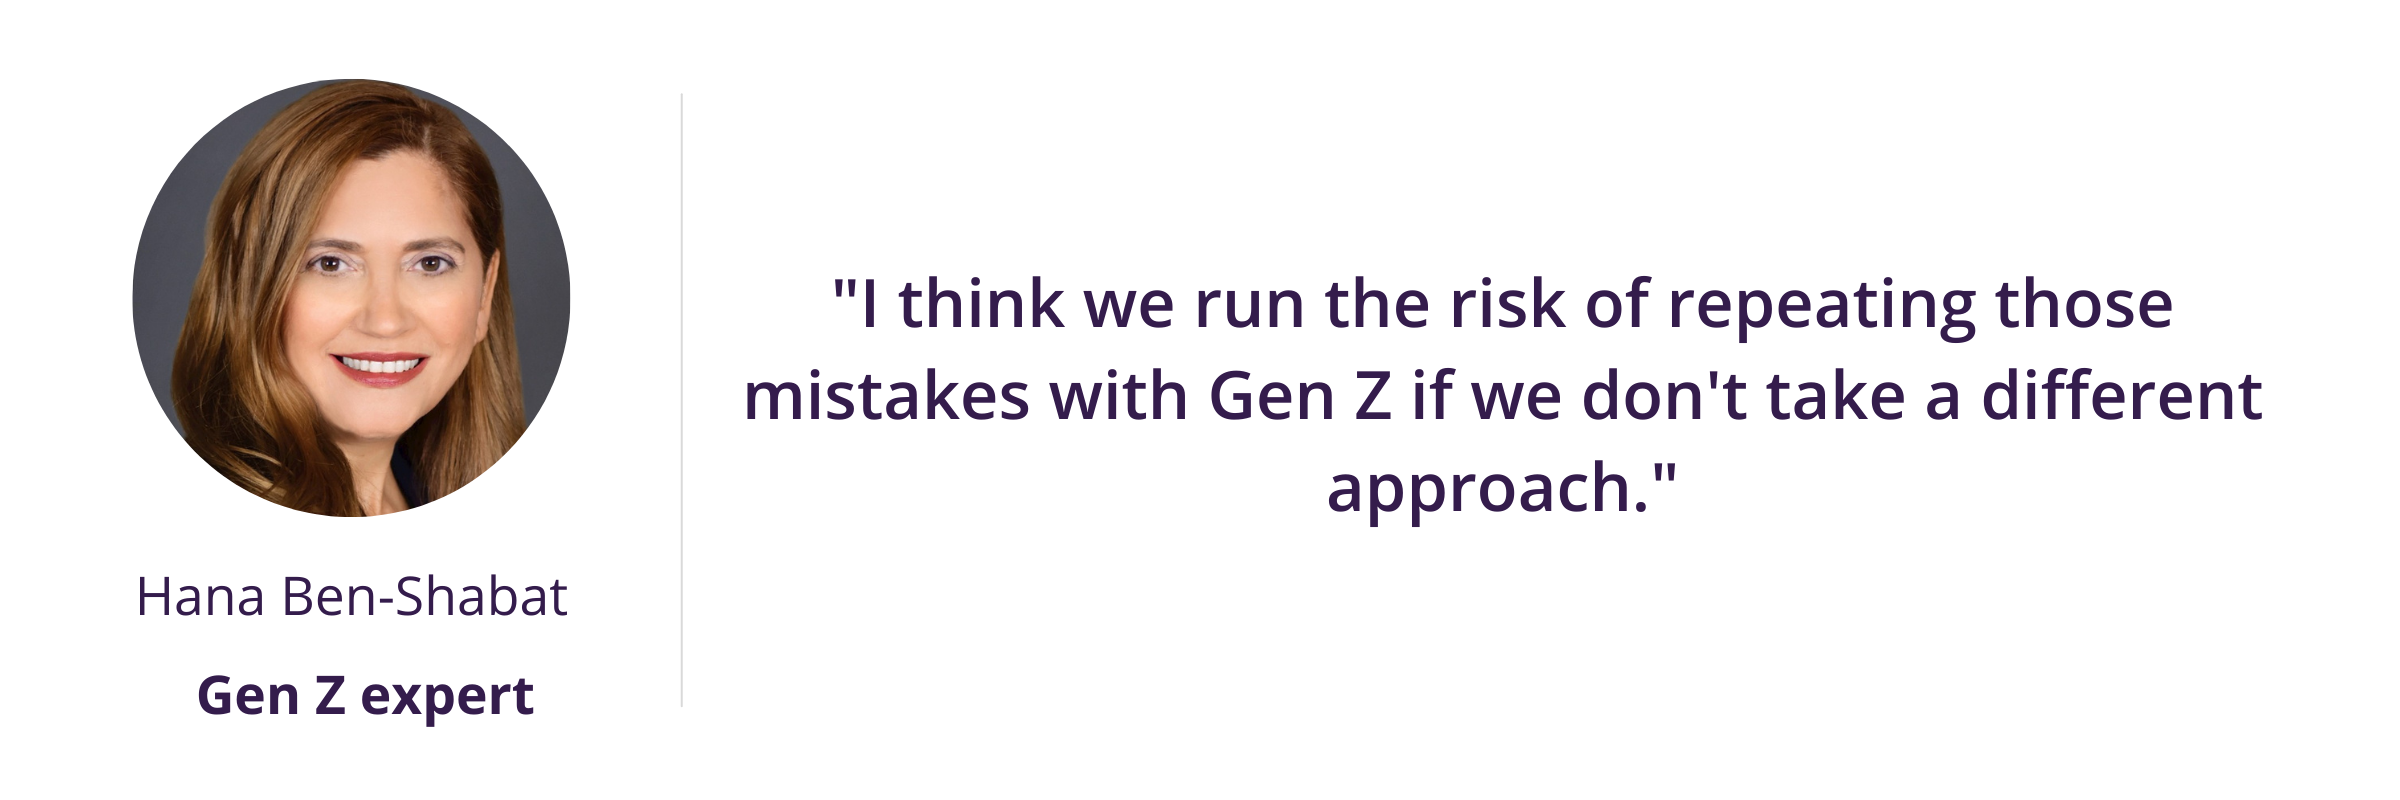 "I think we run the risk of repeating those mistakes with Gen Z if we don't take a different approach."